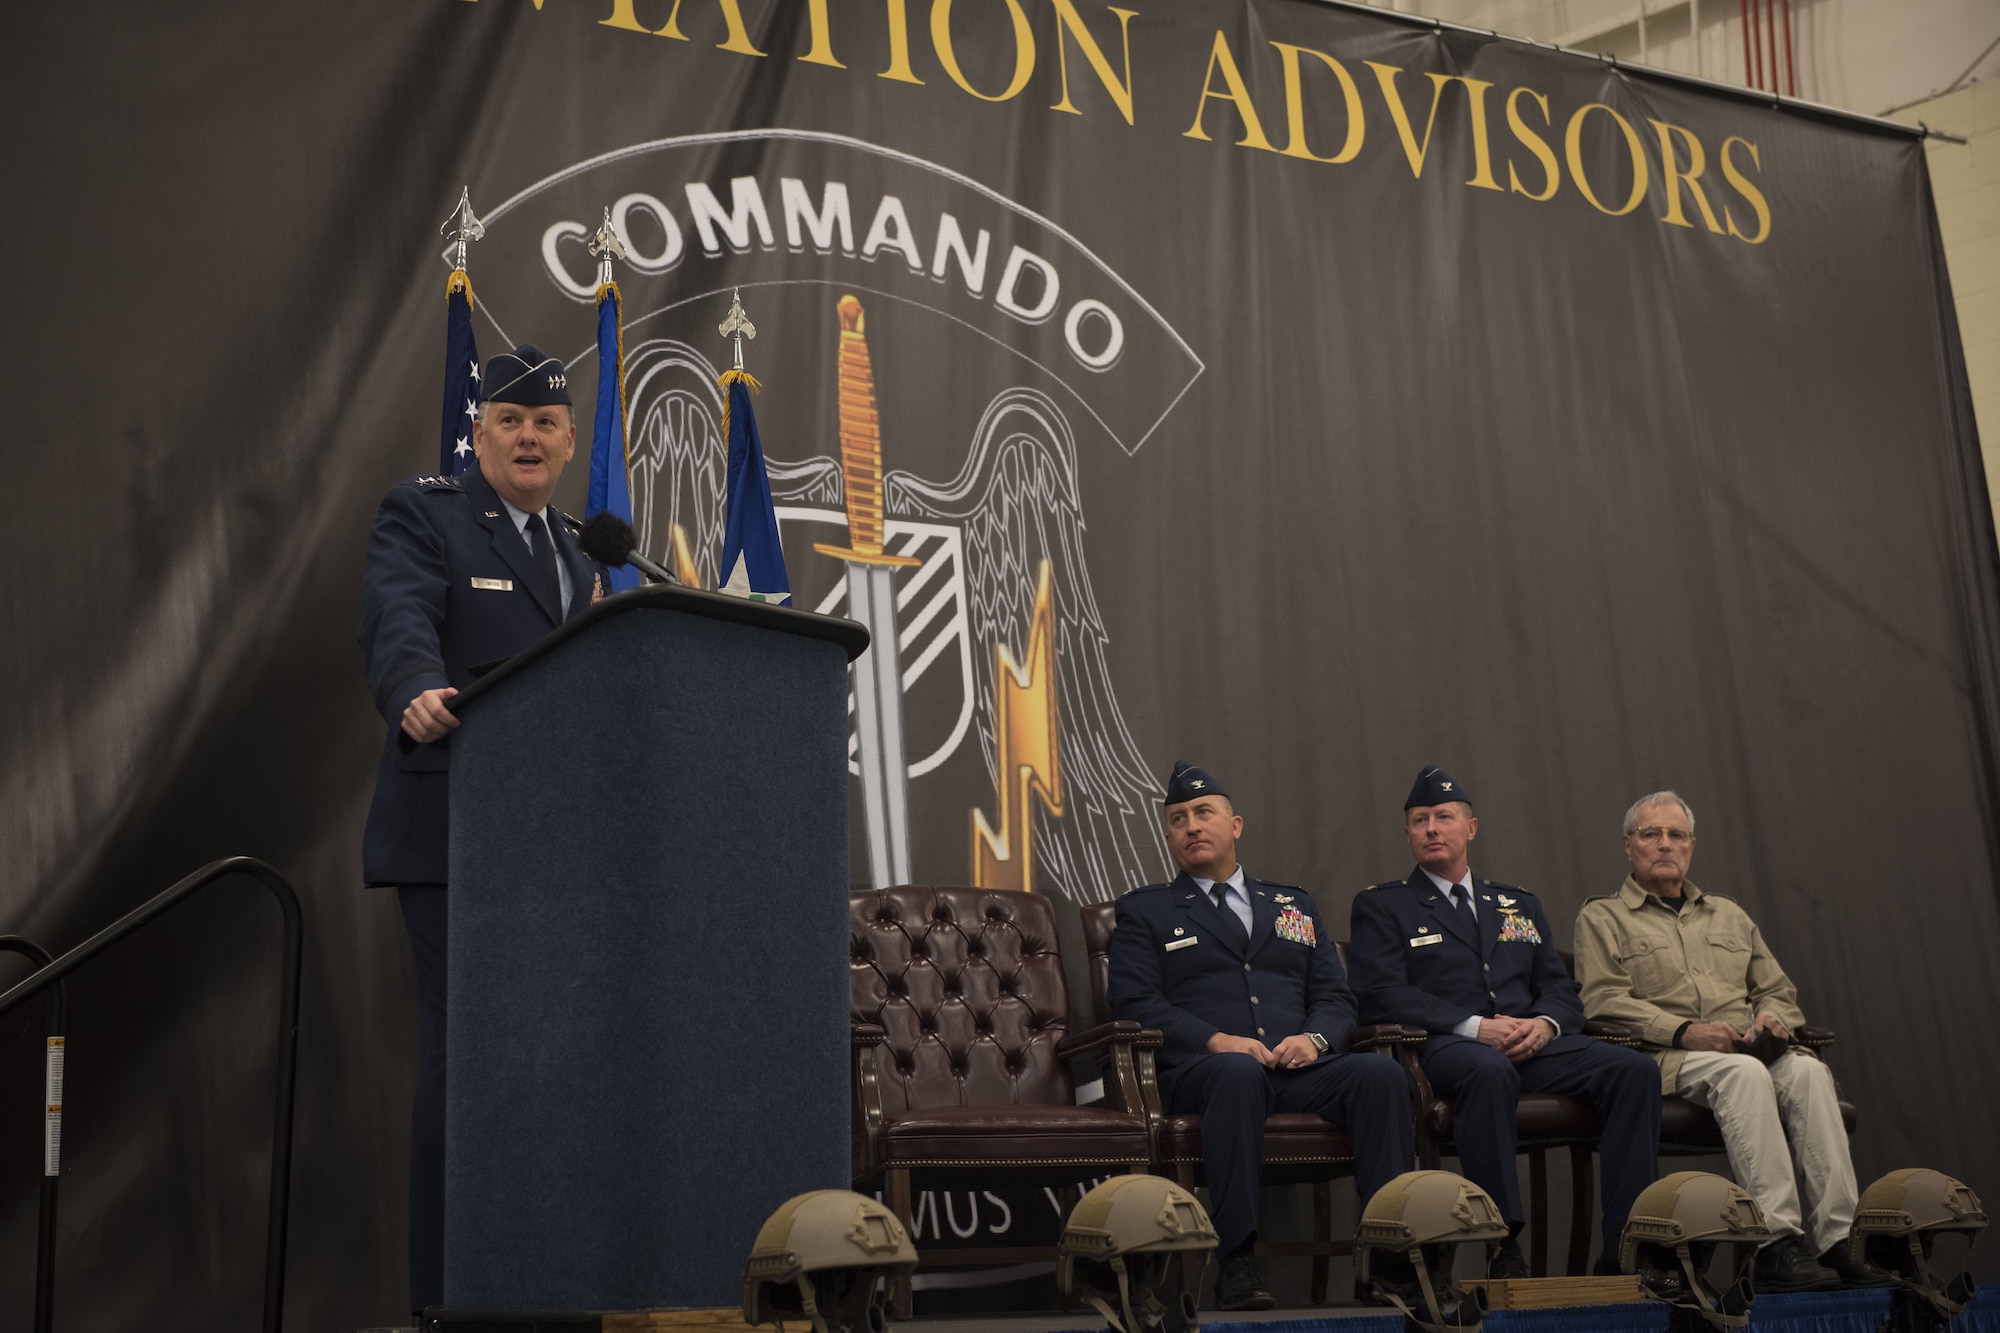 Lt. Gen. Brad Webb, commander of Air Force Special Operations Command, addresses Air Commandos and honored guests in a ceremony at Duke Field